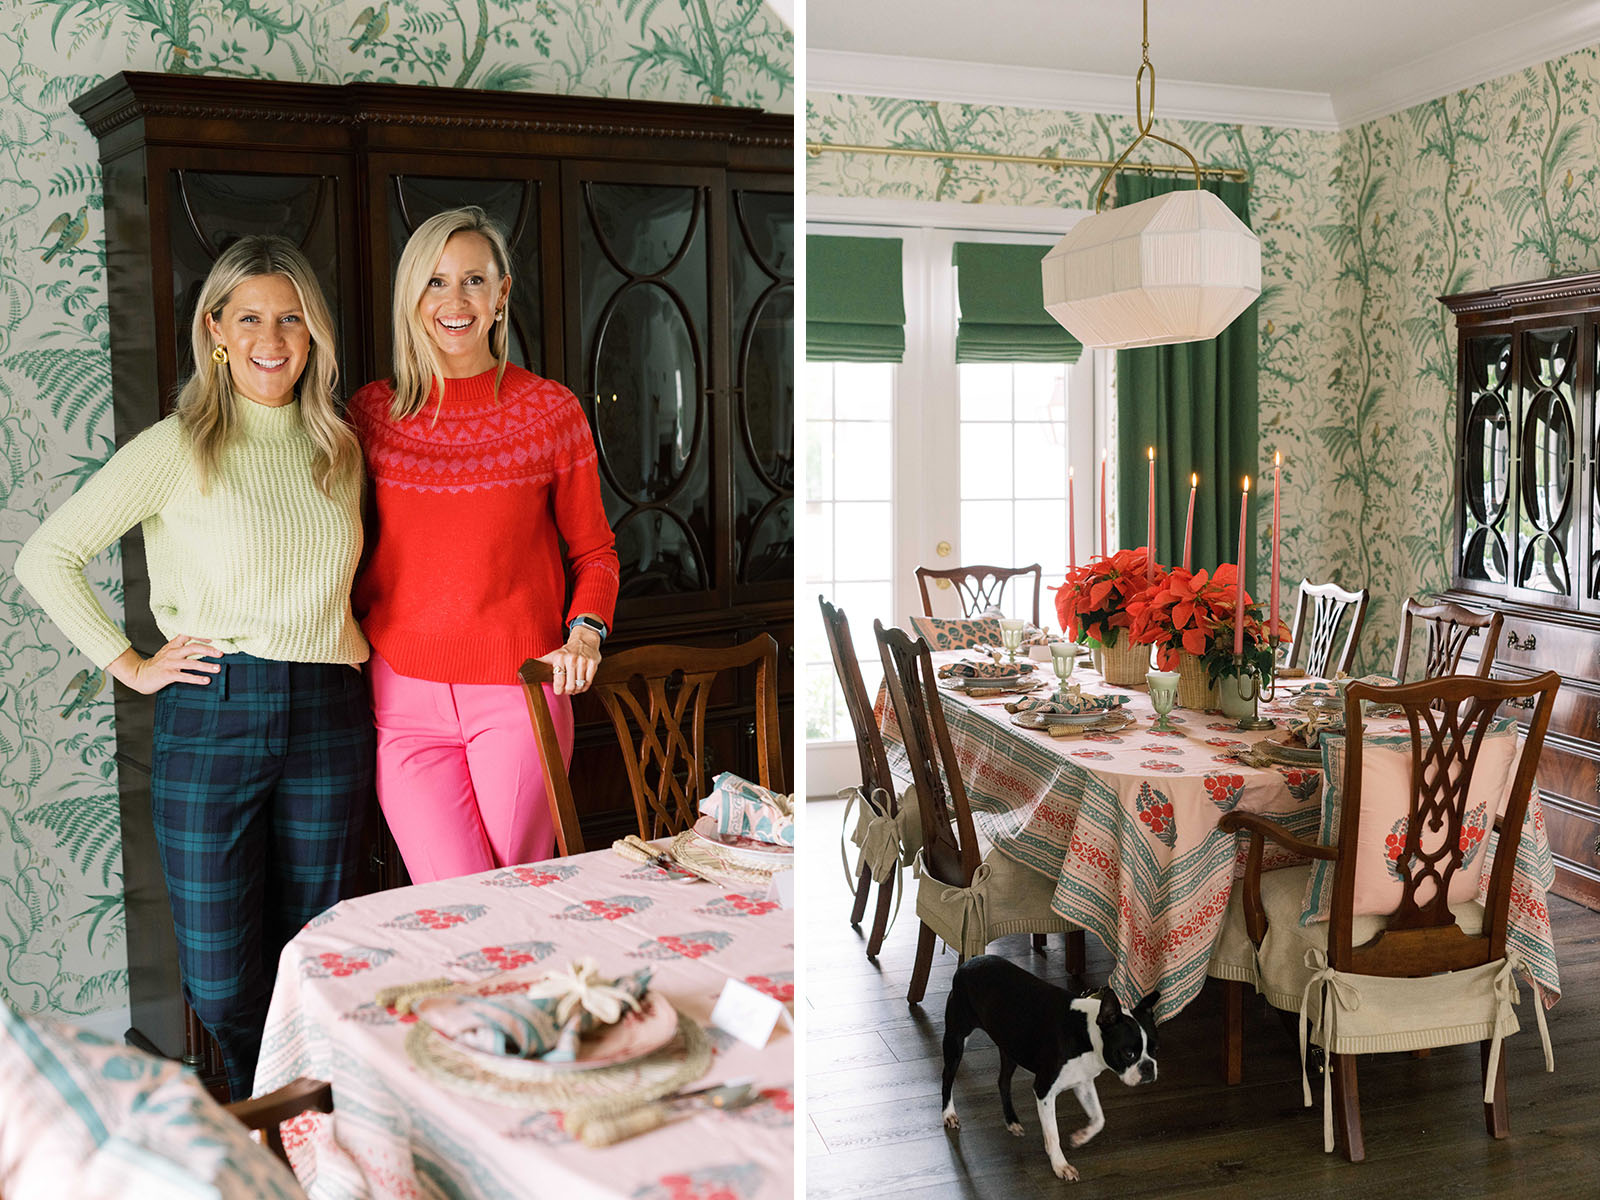 Sisters Molly Boyd and Sarah Tucker posing for a picture behind their holiday tablescape that features traditional Indian blockprinted tablecloth and napkins.